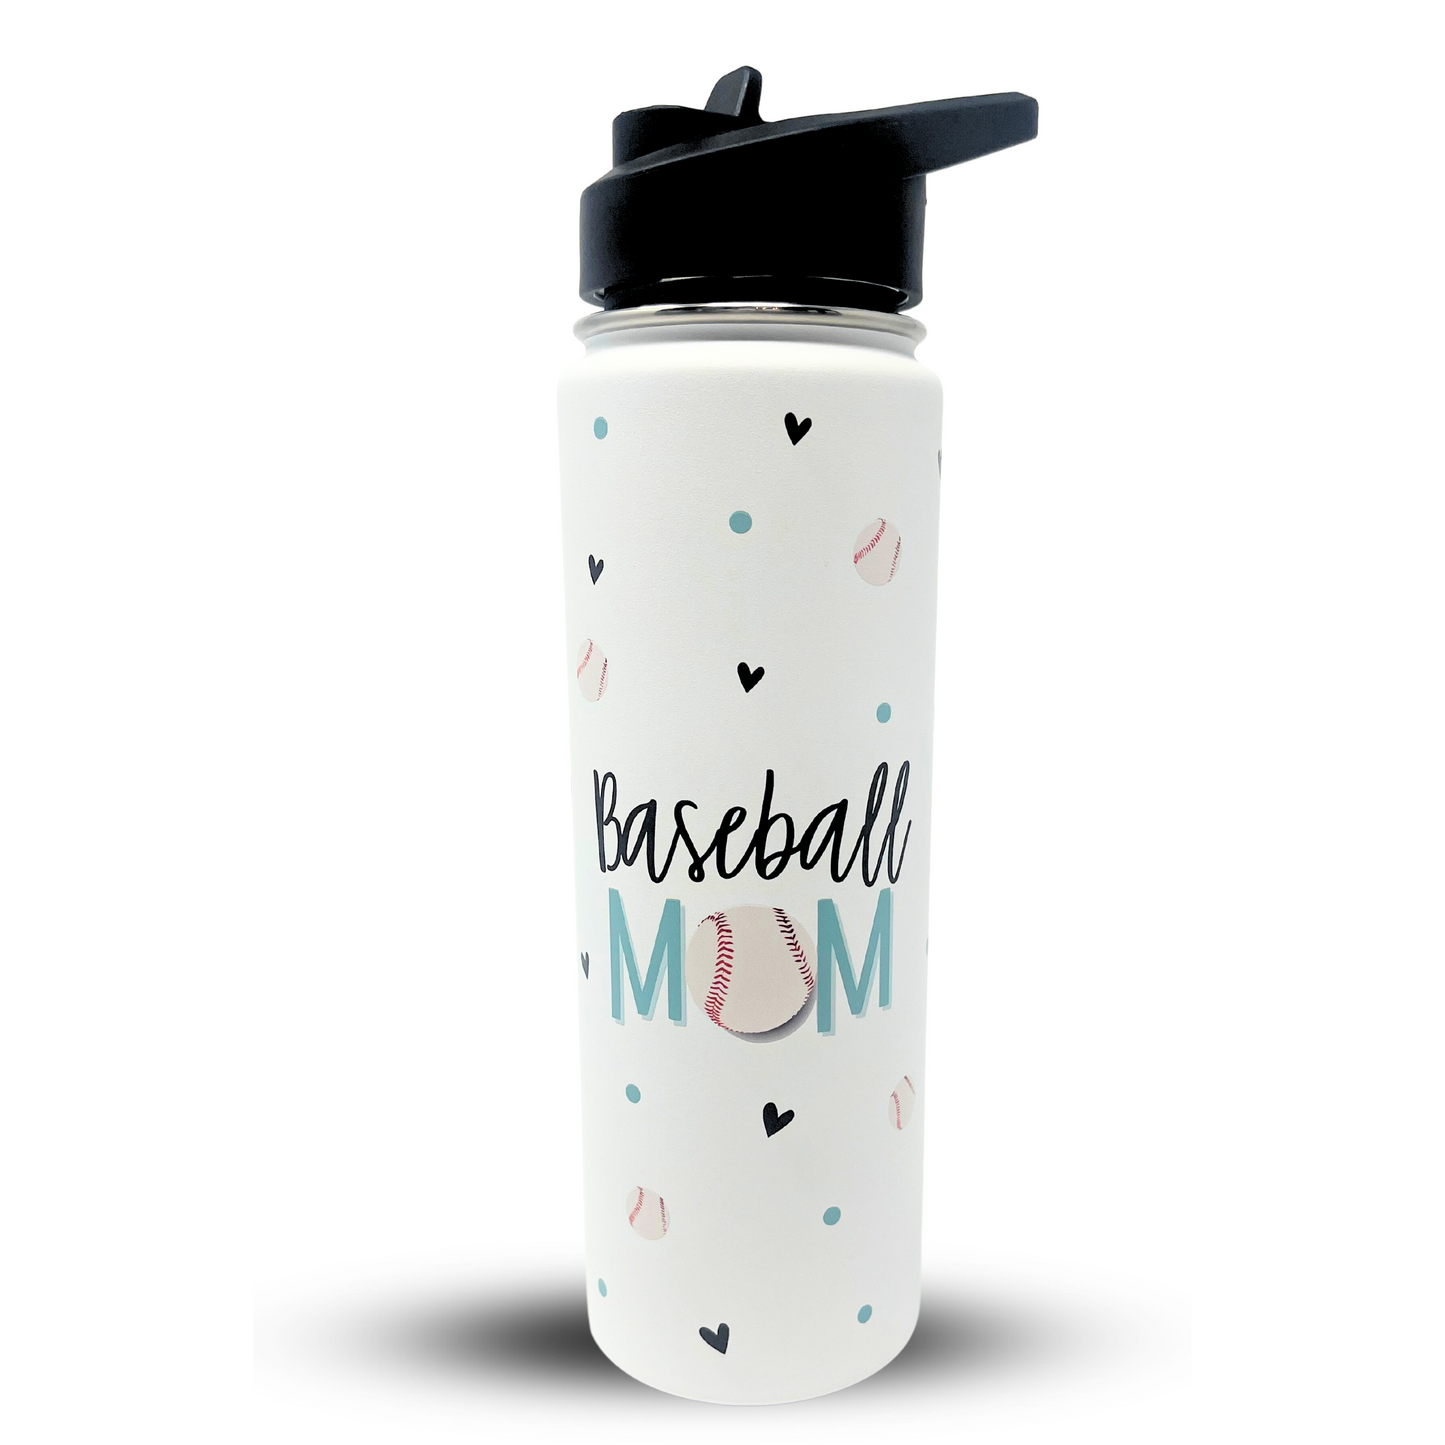 Brooke & Jess Designs Baseball Mom Tumbler Gifts - Large Insulated Water Bottle with Straw - Stainless Steel Metal 24 oz Travel Cup for Mom, Mama, Mother, Wife, Women | Keeps Hot and Cold for Hours